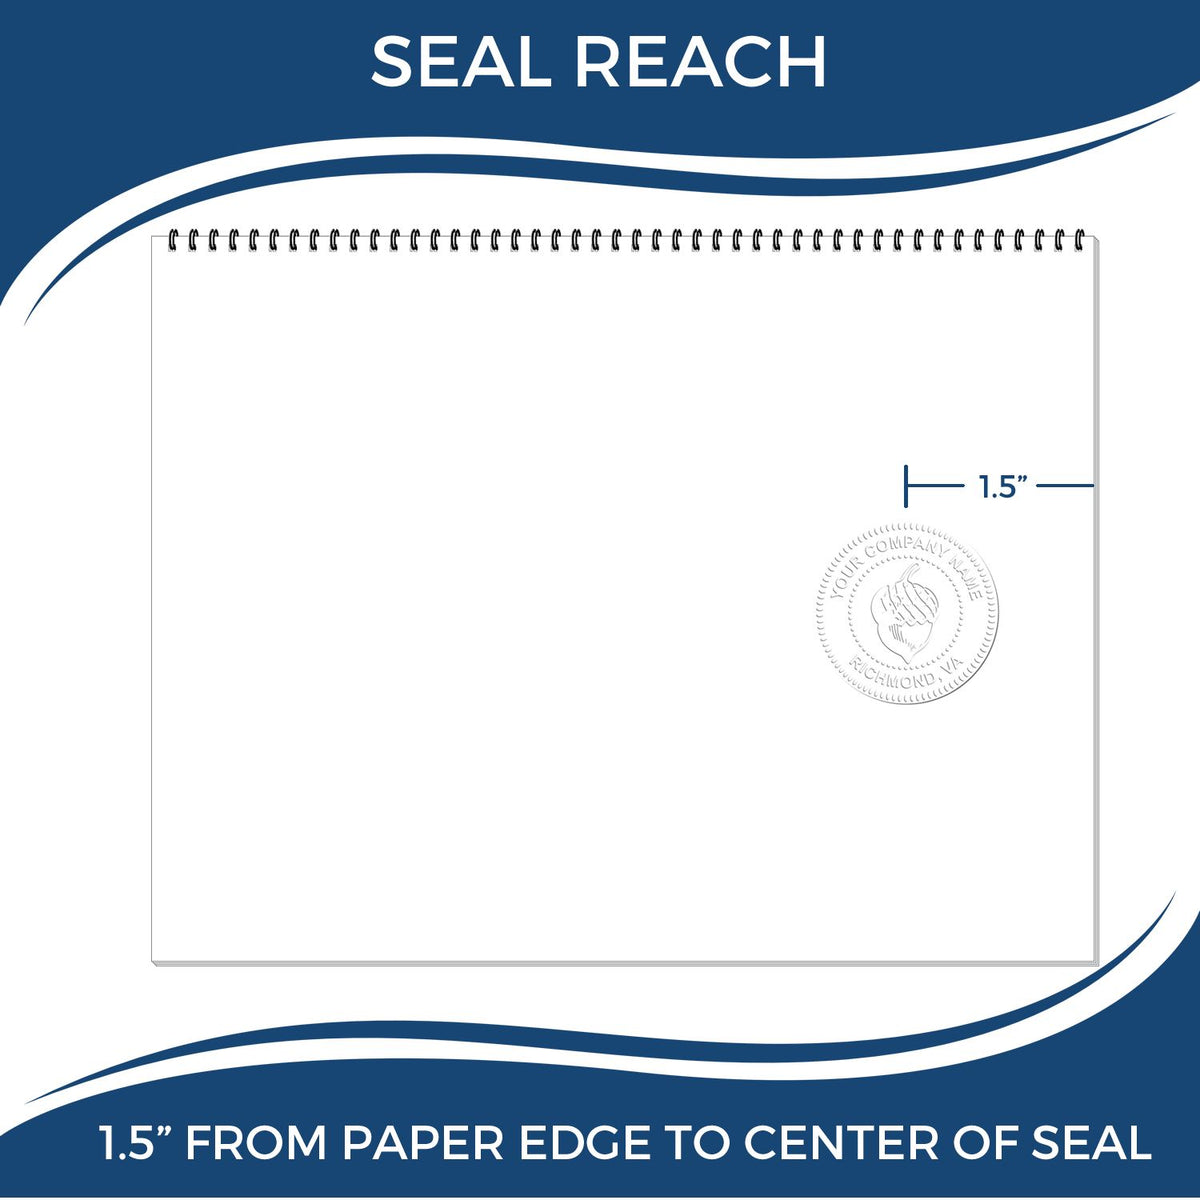 An infographic showing the seal reach which is represented by a ruler and a miniature seal image of the Gift Oklahoma Landscape Architect Seal